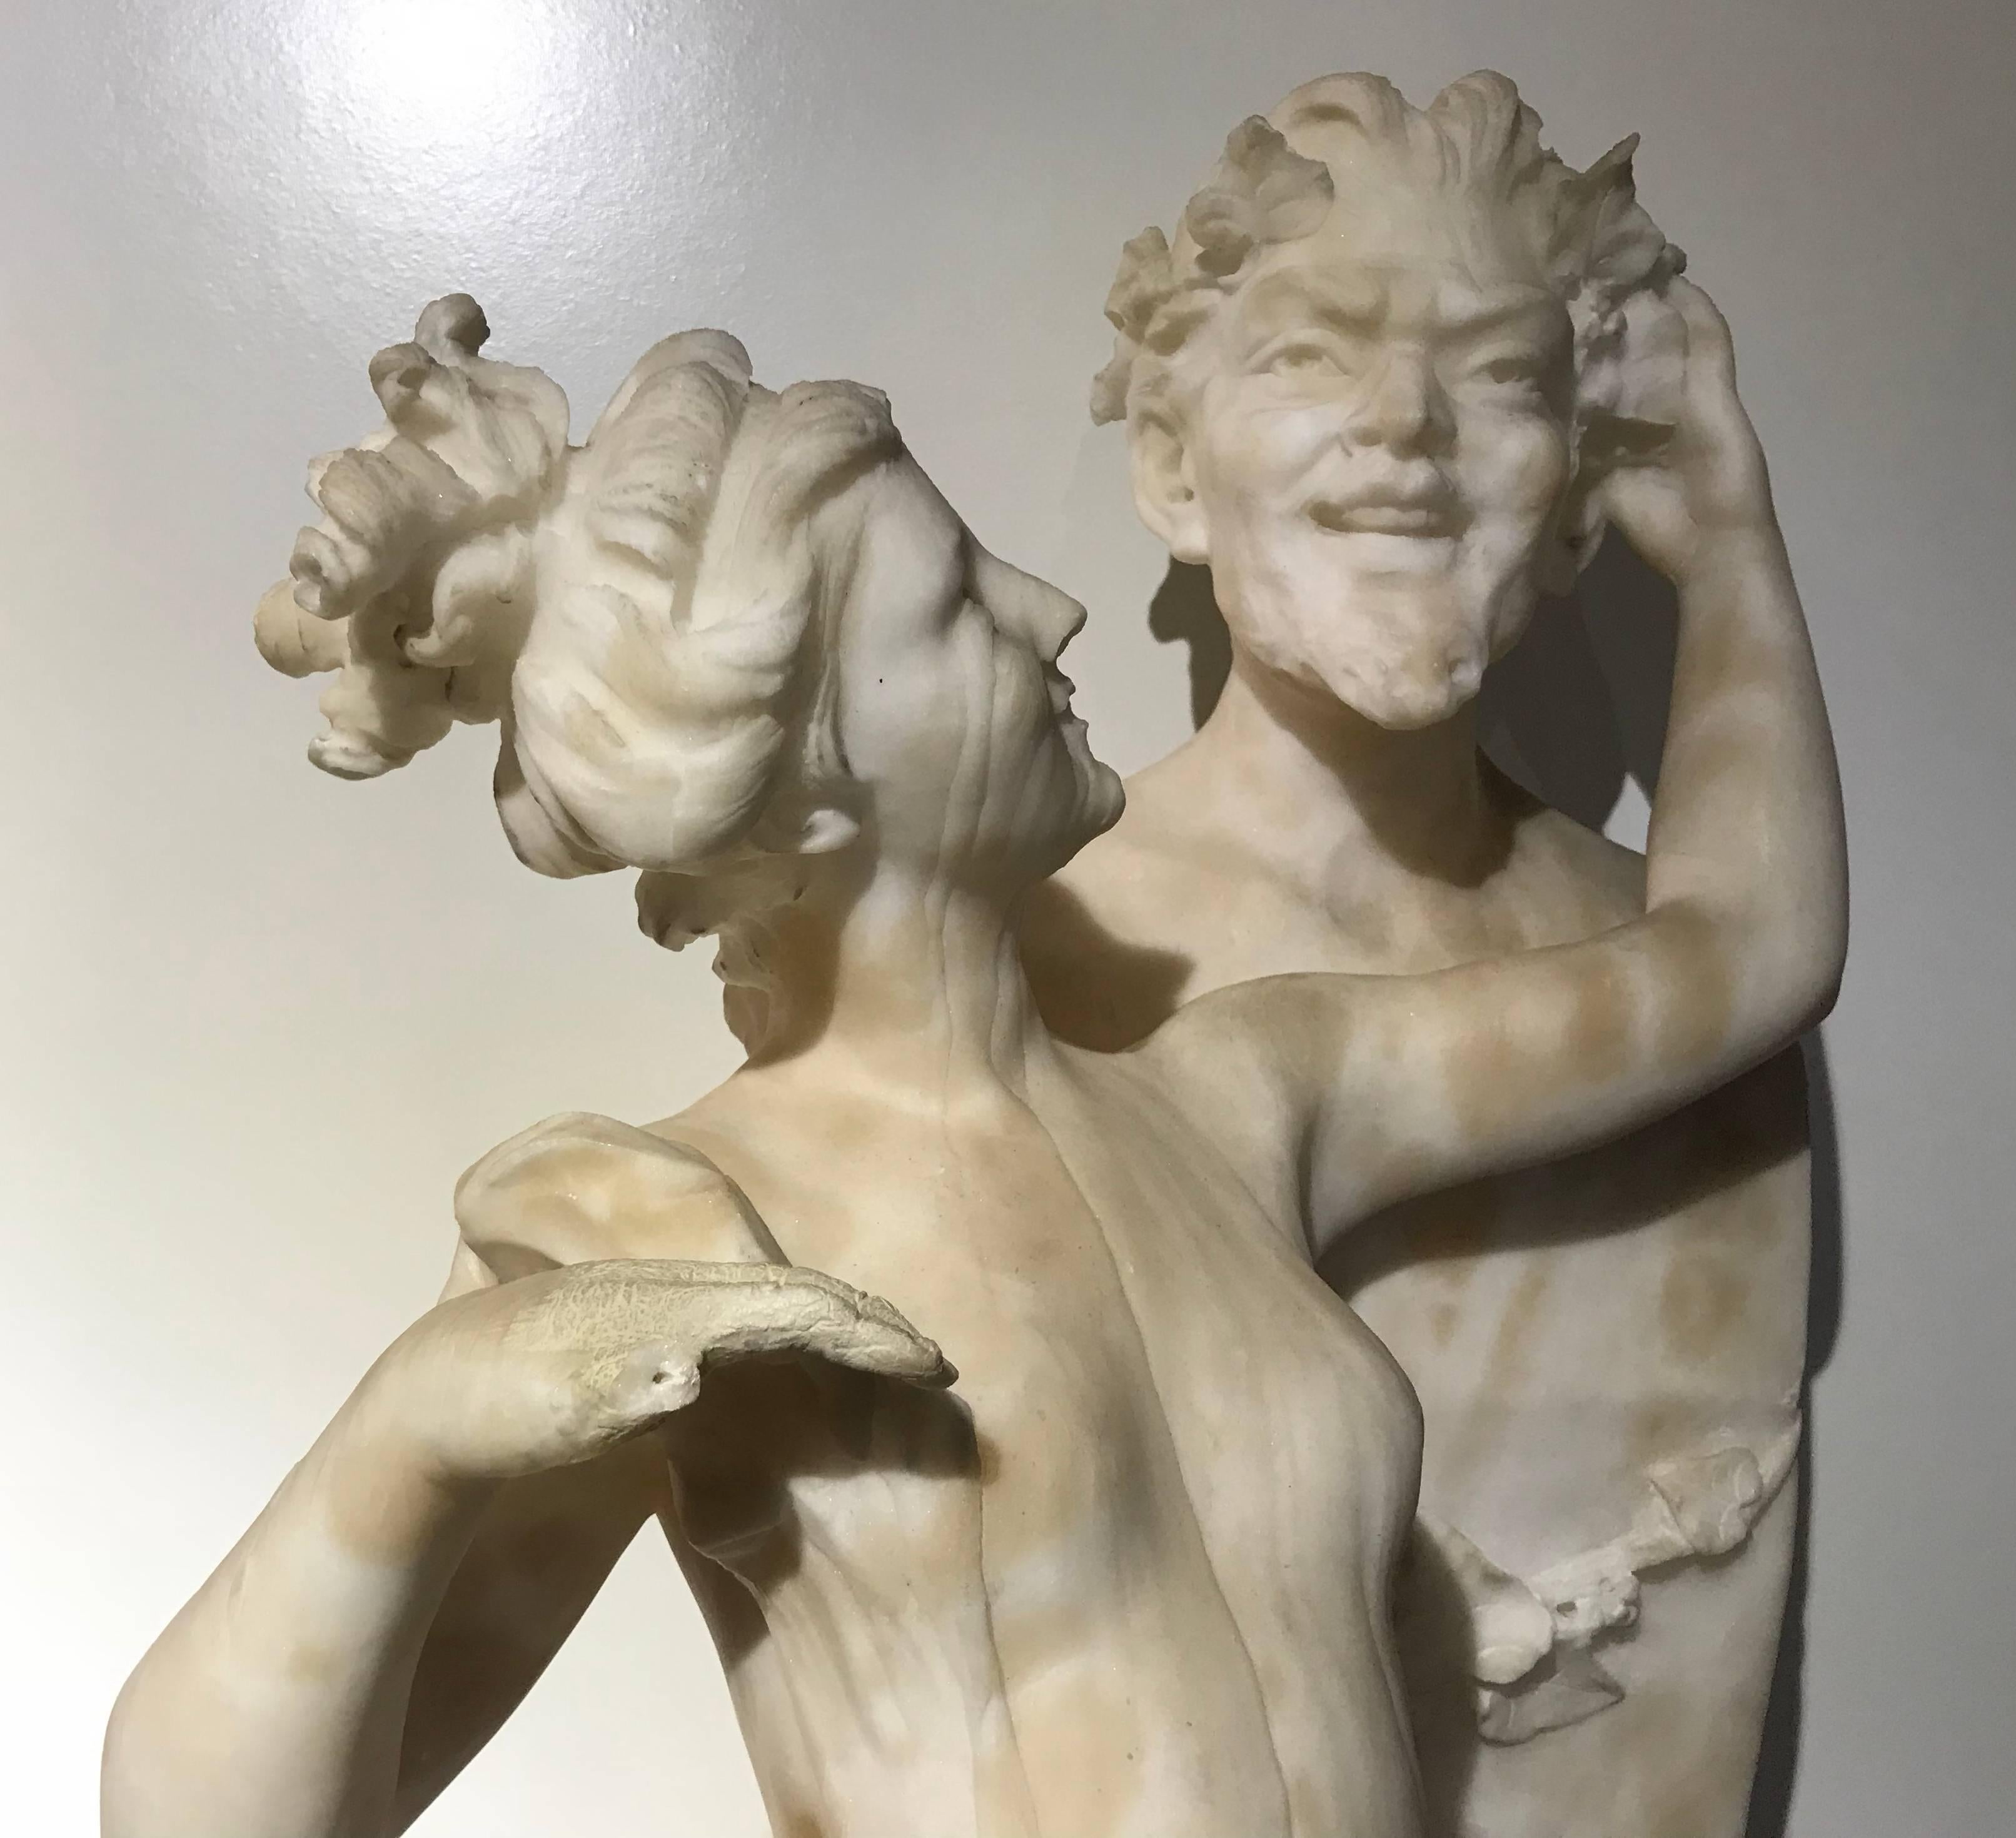 Hand-Carved Italian Tuscany Neoclassical Style White Alabaster Sculpture Signed Fiaschi For Sale